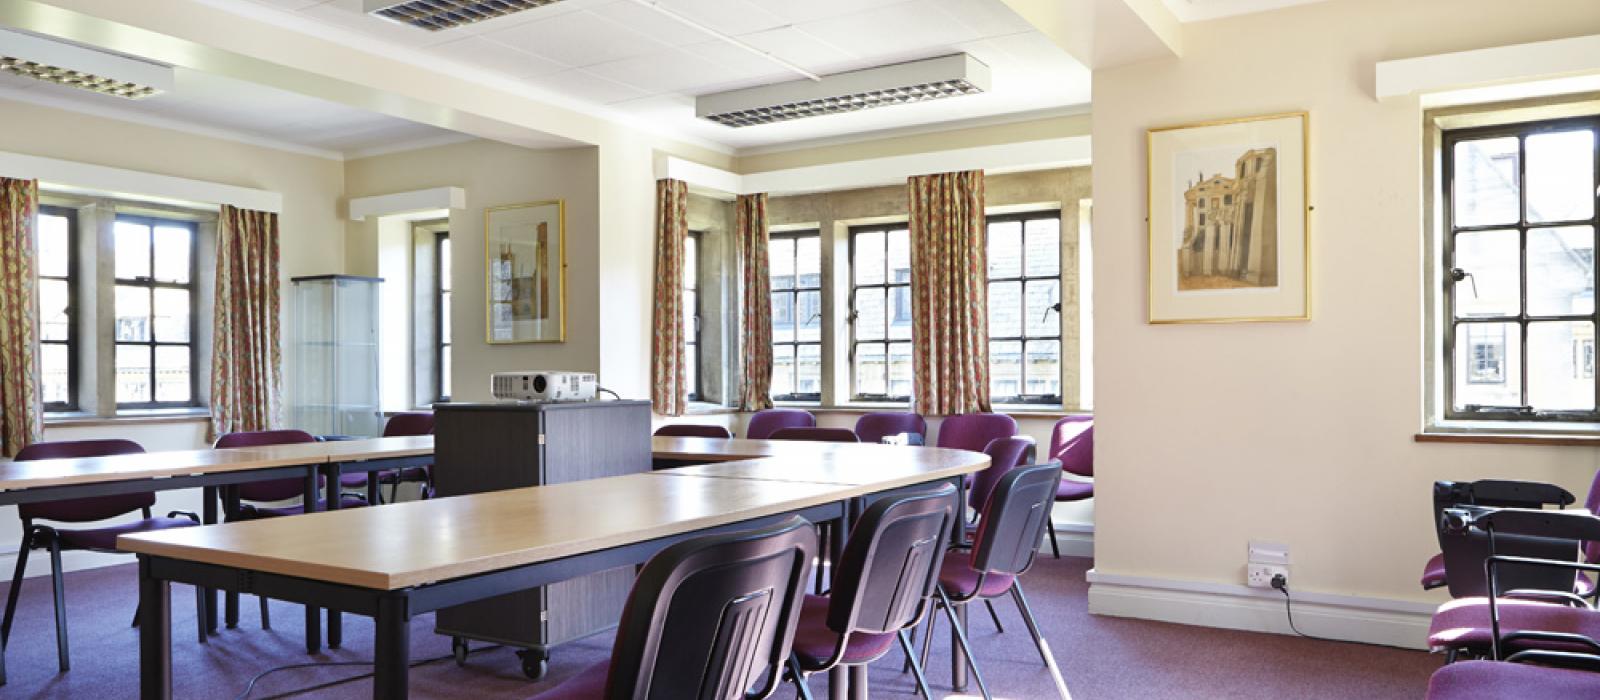 Conference Room, Nuffield College